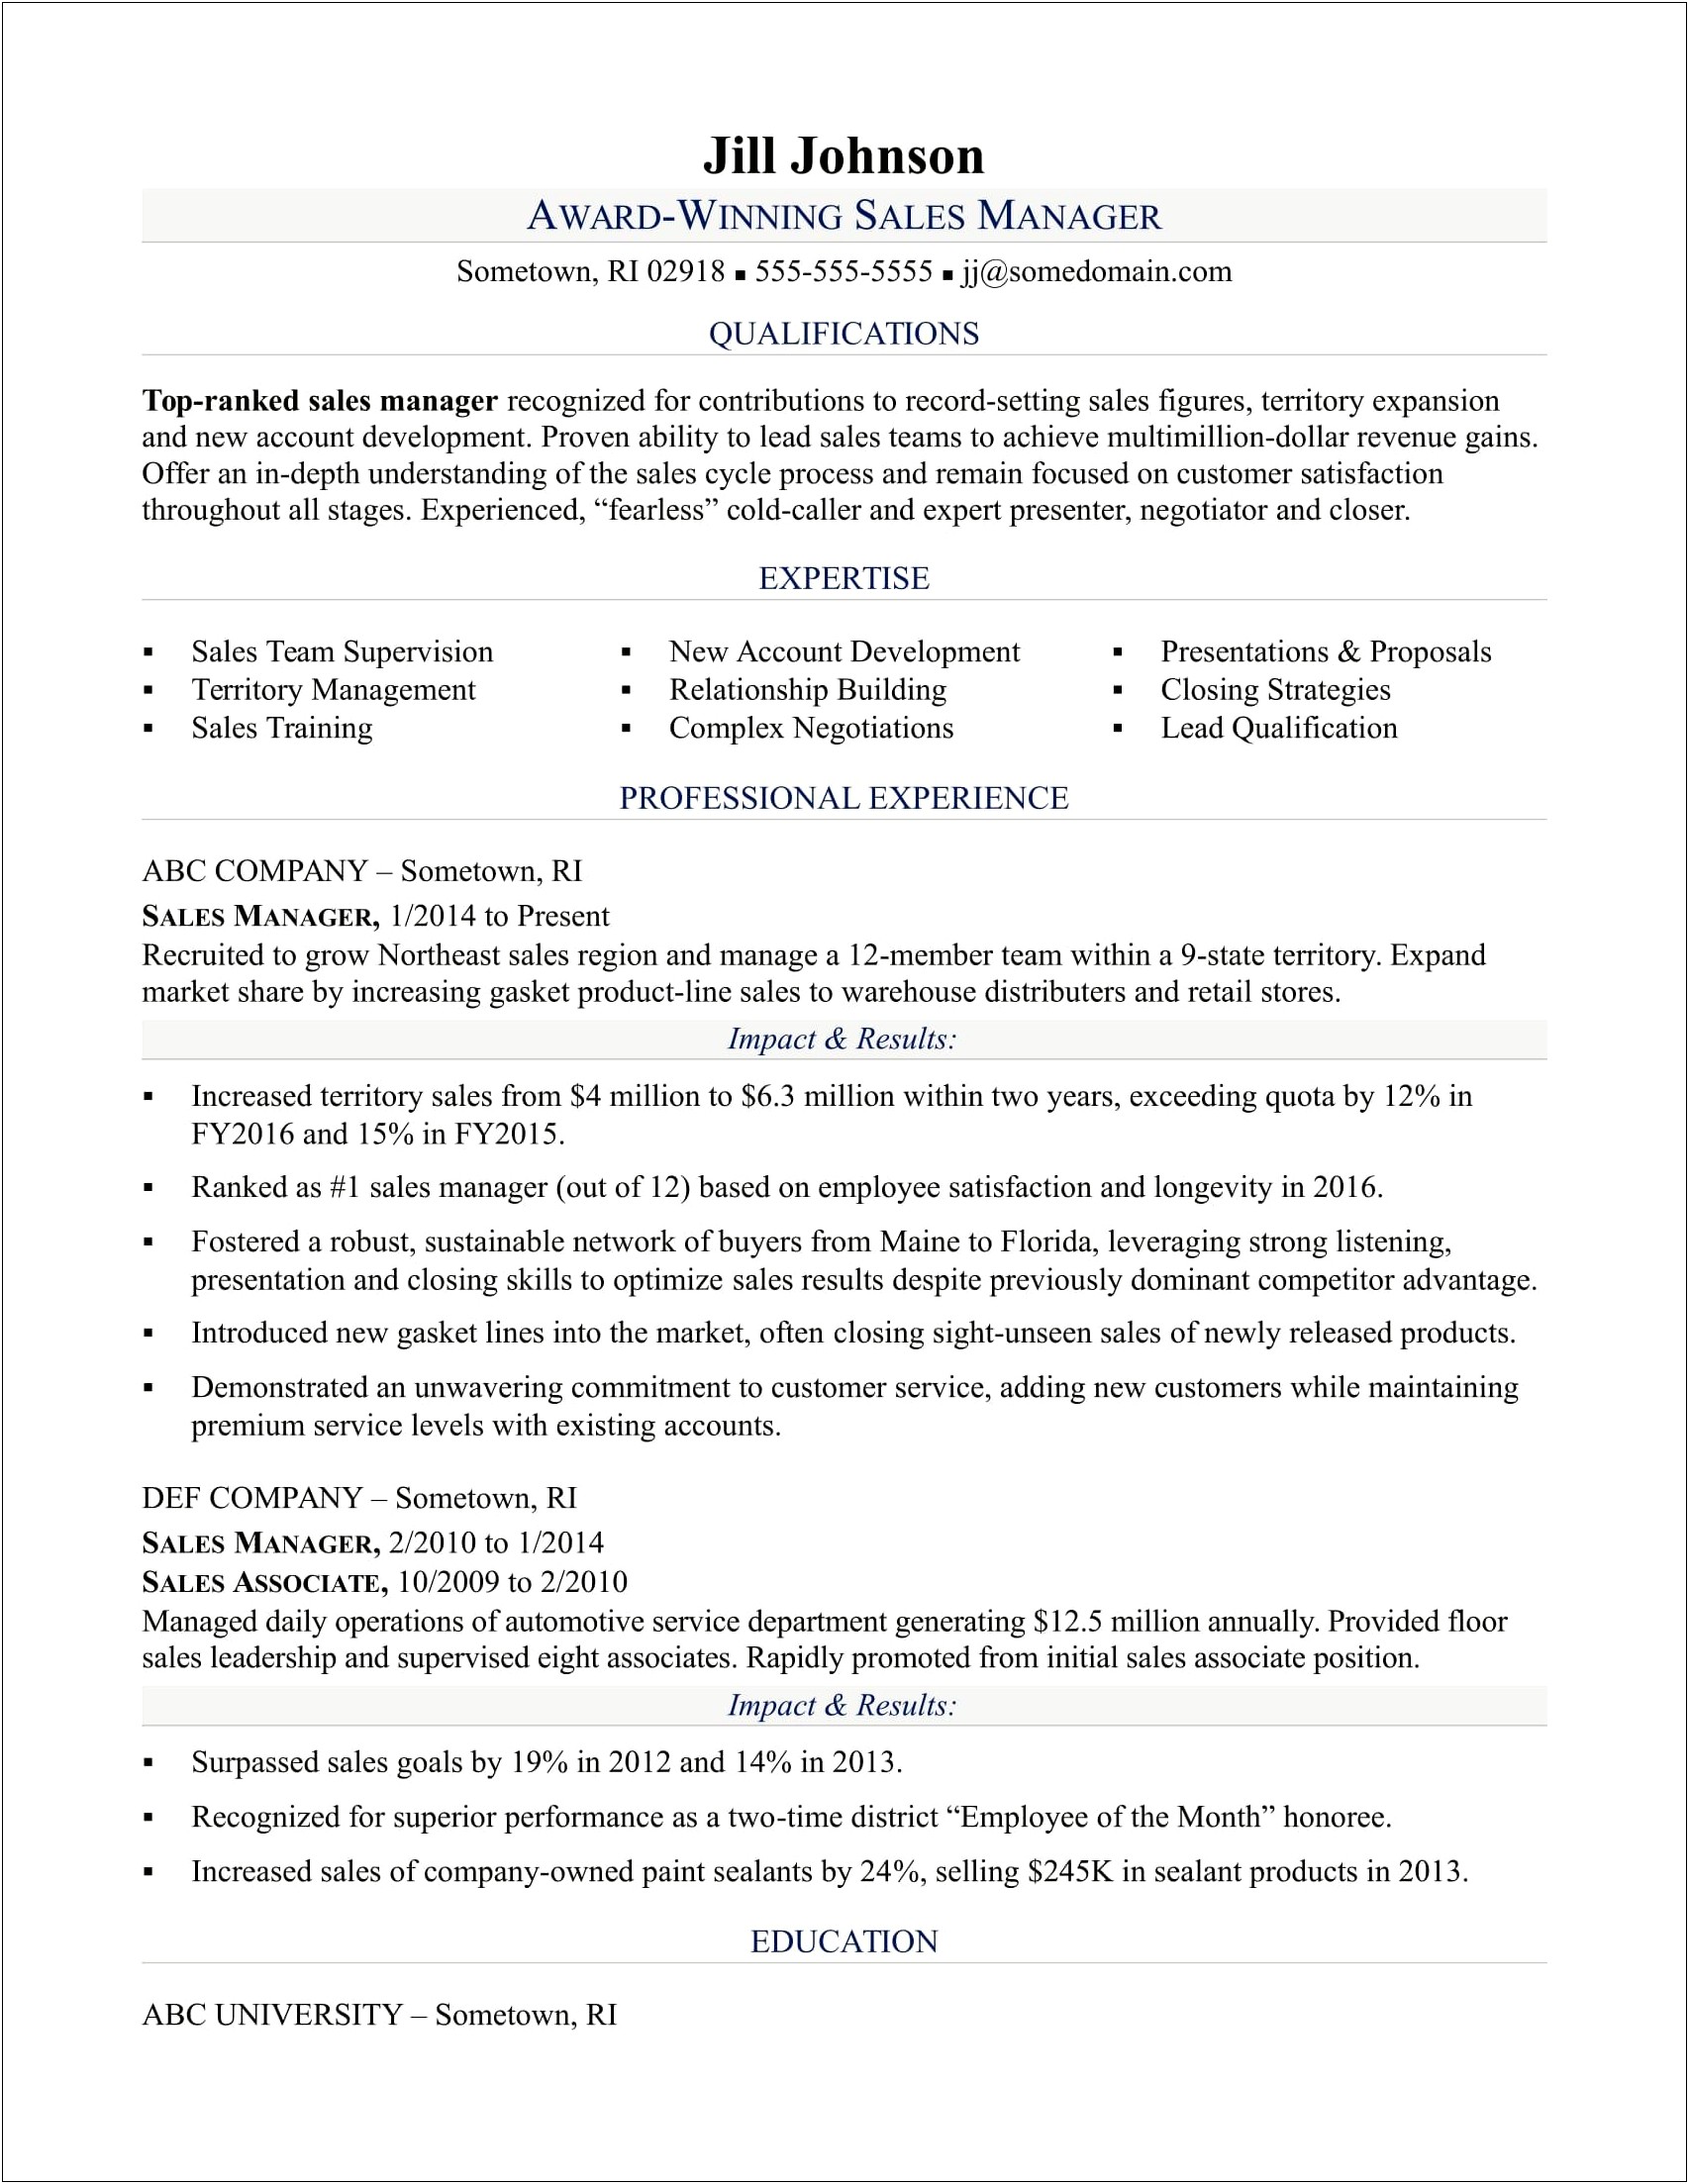 Writing A Professional Summary On Your Resume Examples